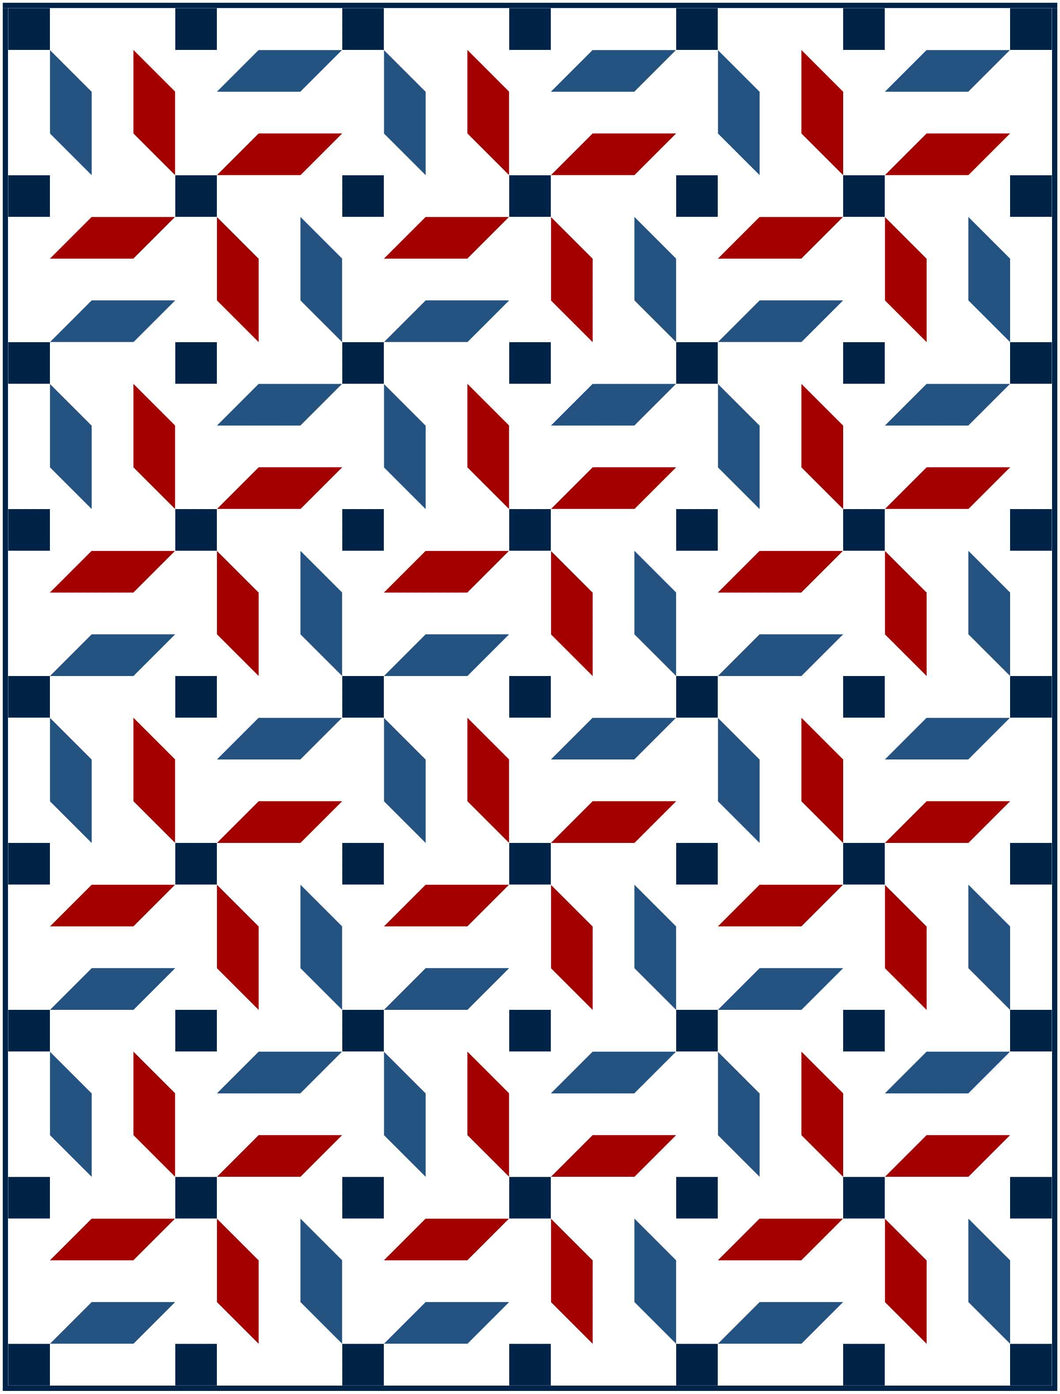 Patriotic Propeller Quilt Kit Throw by Mandi Persell of Sewcial Stitch